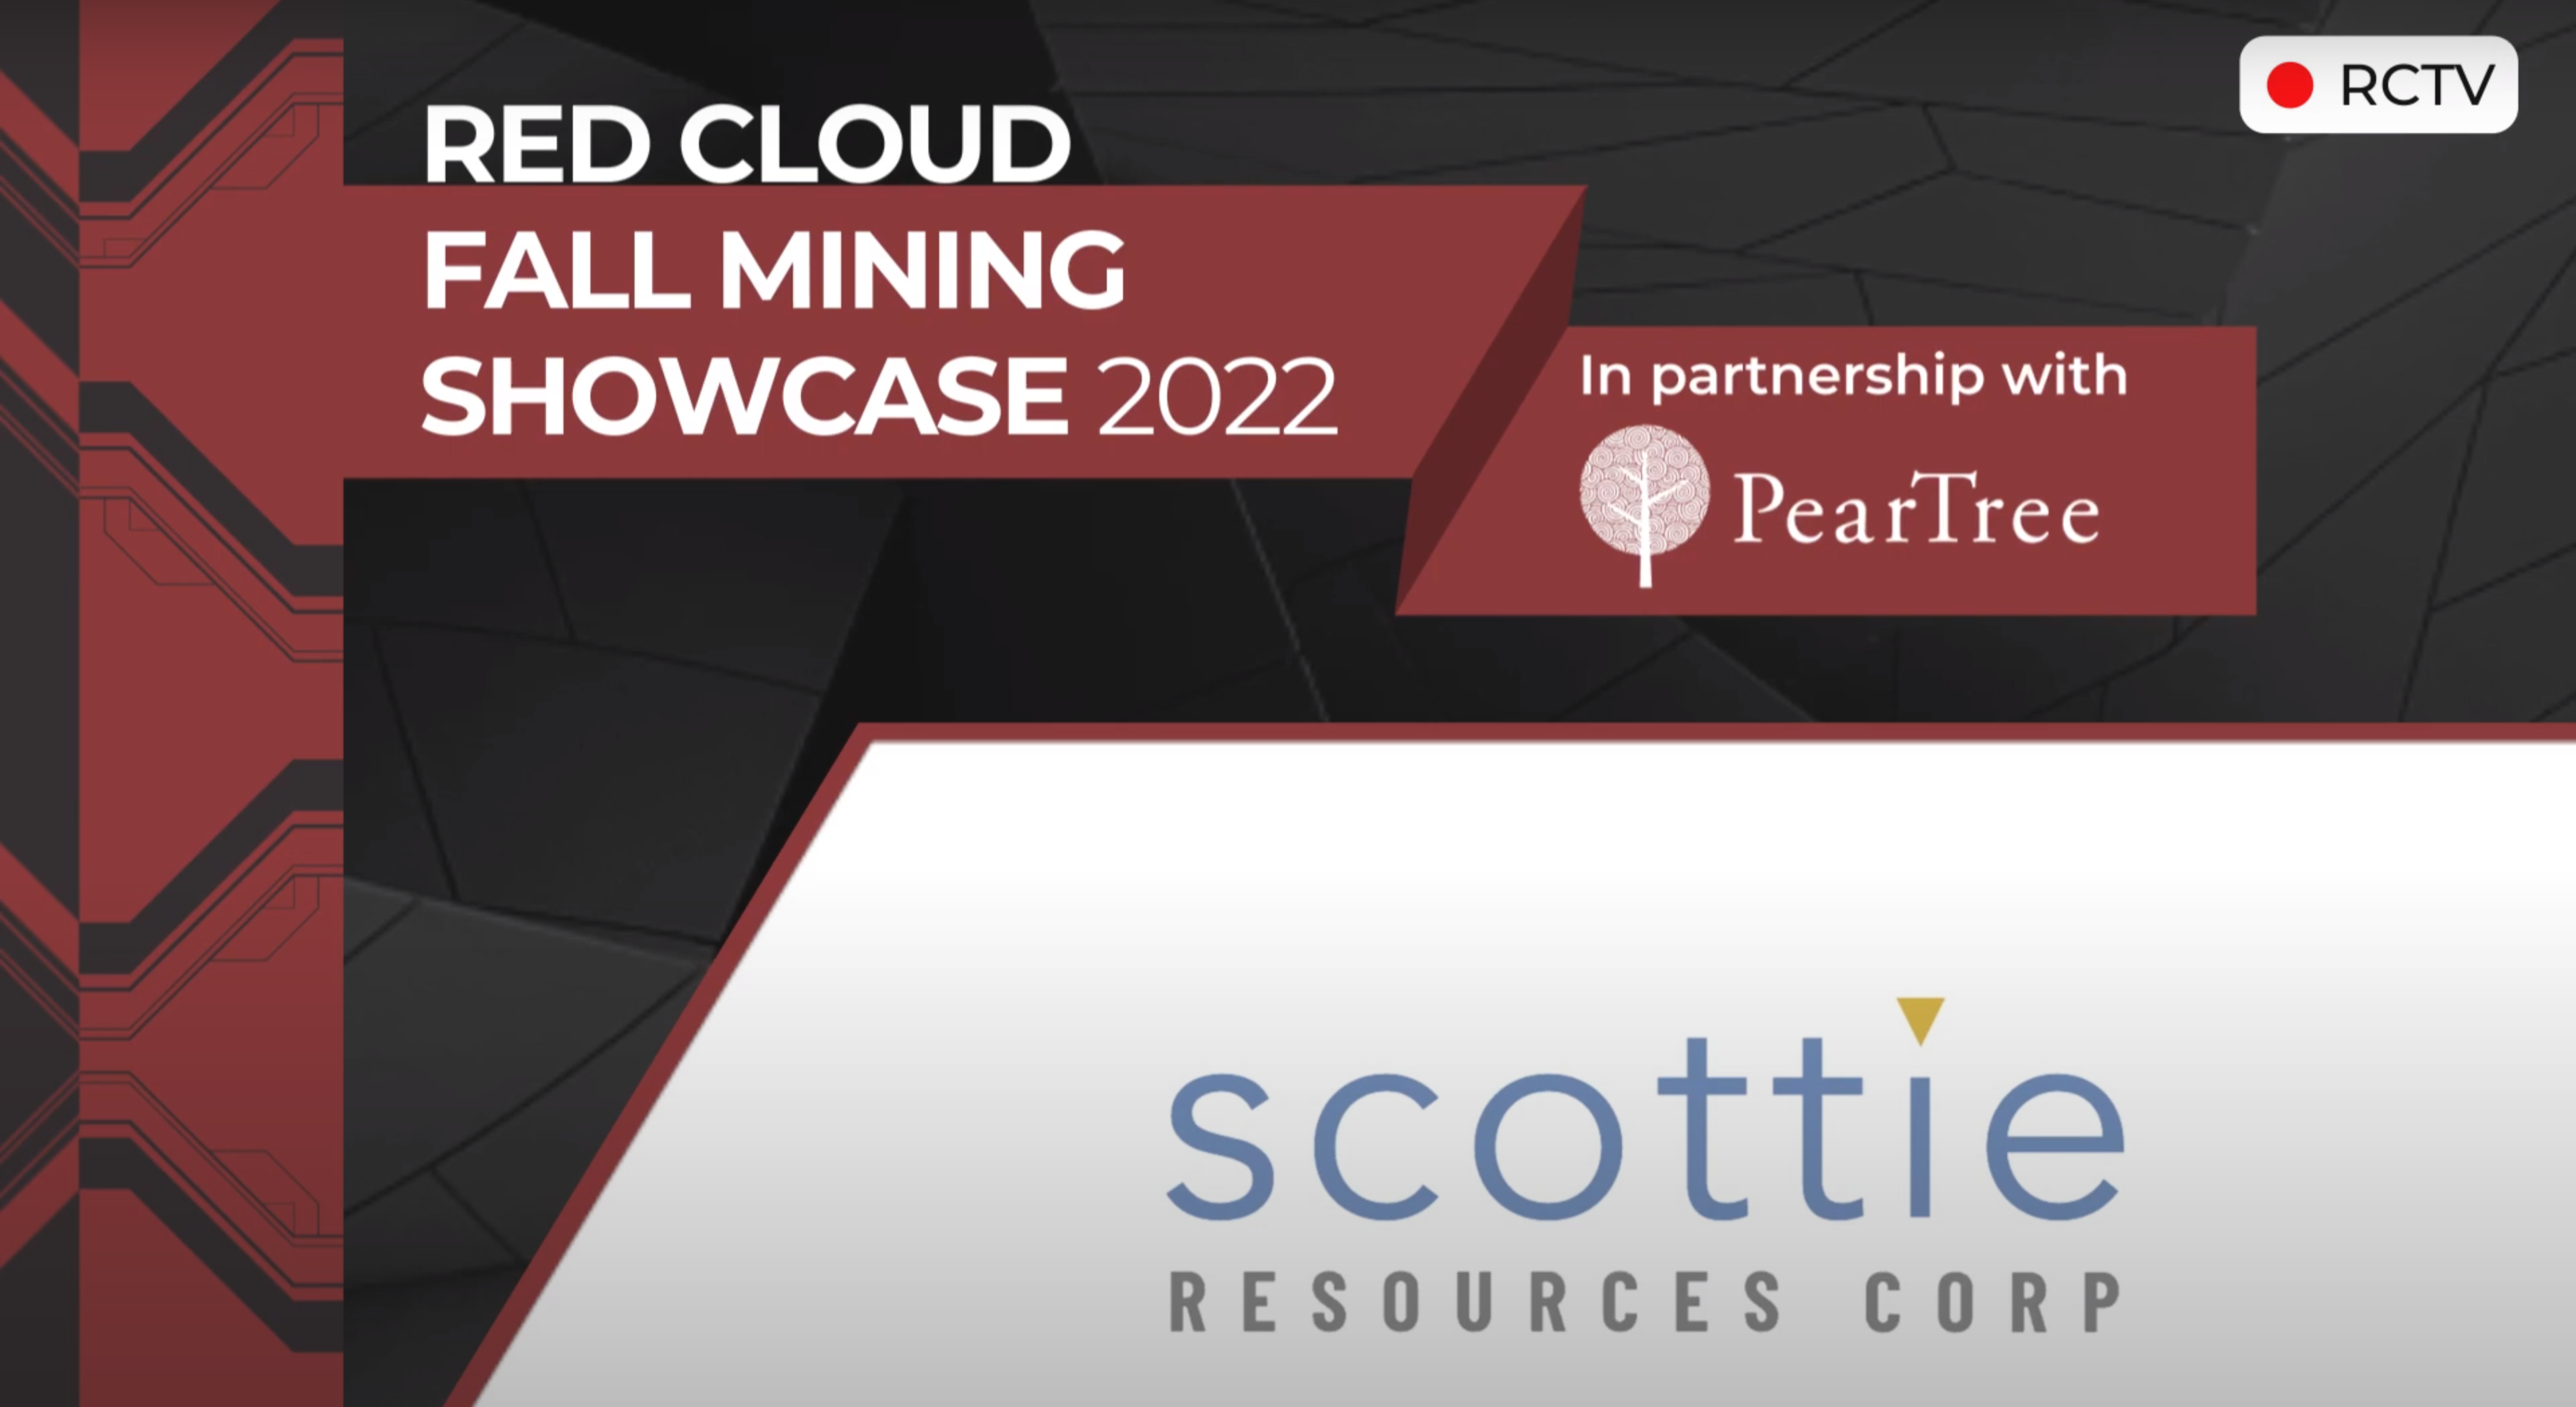 President & CEO Brad Rourke at the Red Cloud Mining Showcase